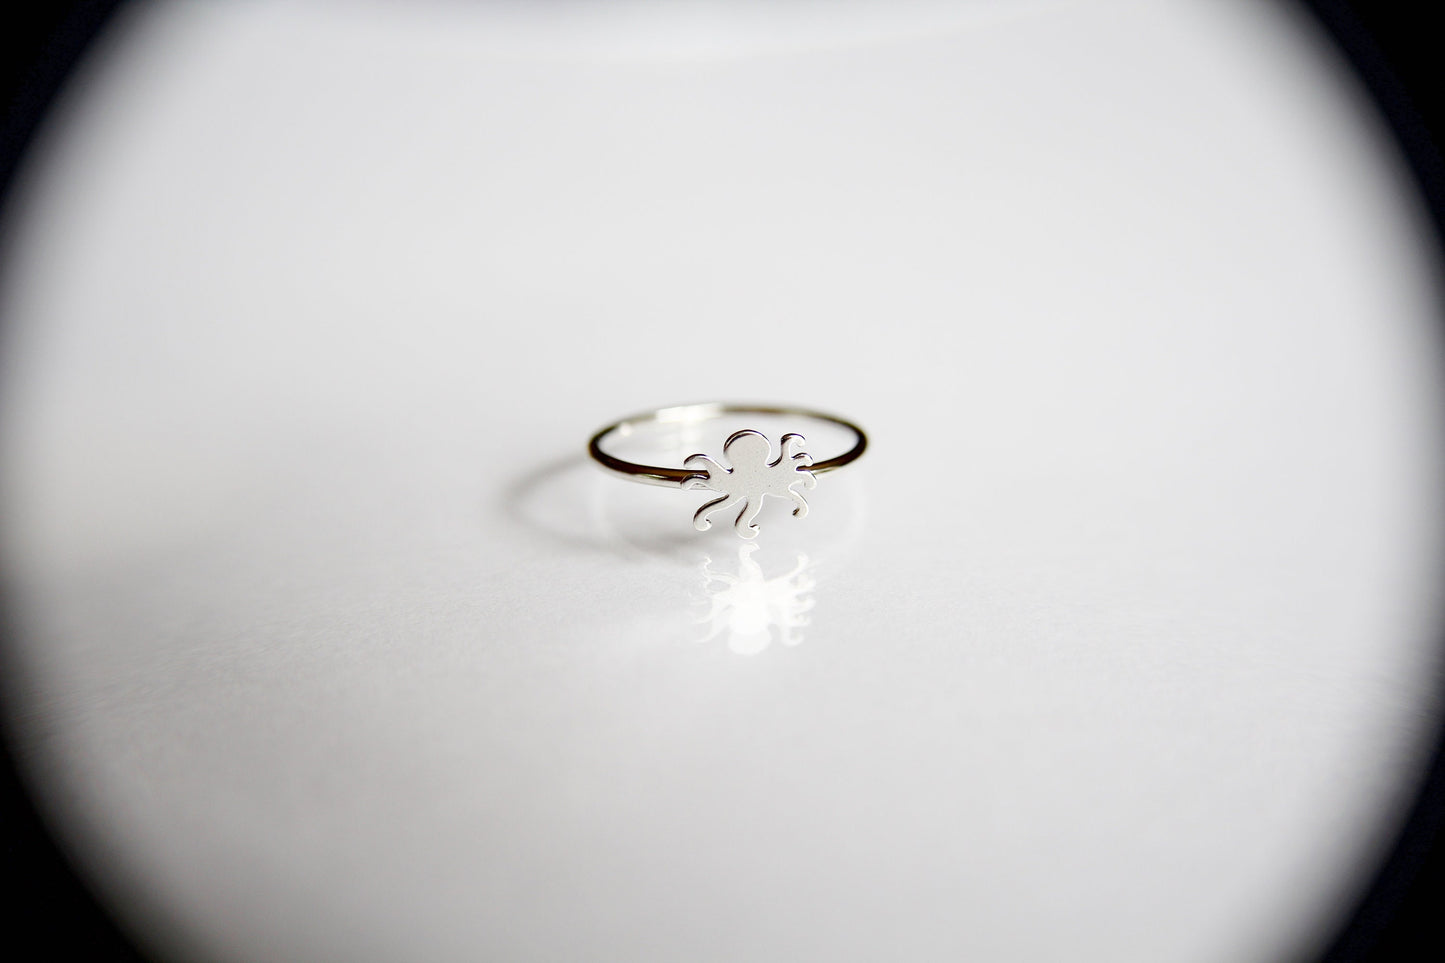 Octopus Ring, Sterling Silver Octopus Ring, Minimalistic Tiny Octopus Ring, cephalopod Jewelry, cephalopod Ring, Ocean Jewelry, gift